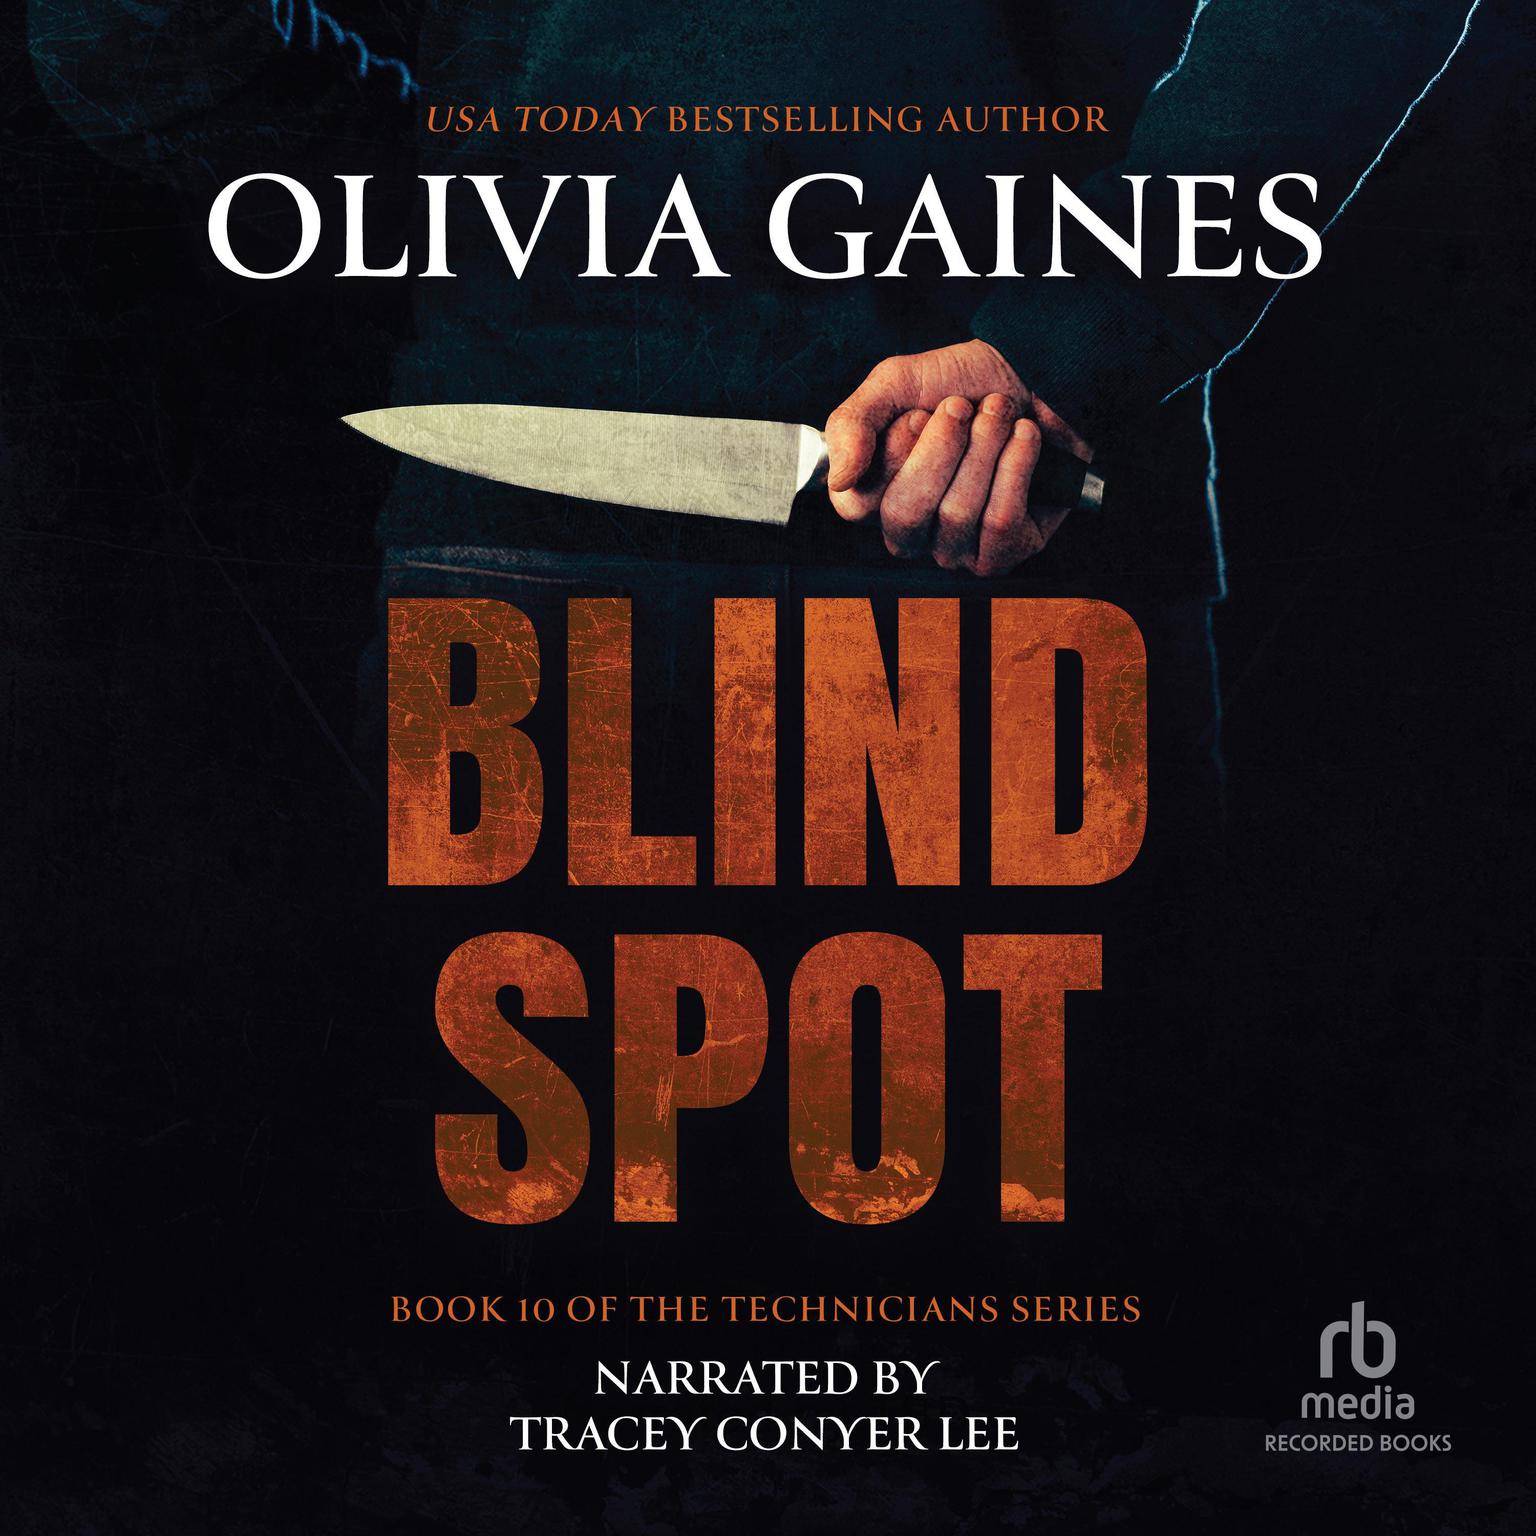 Blind Spot Audiobook, by Olivia Gaines